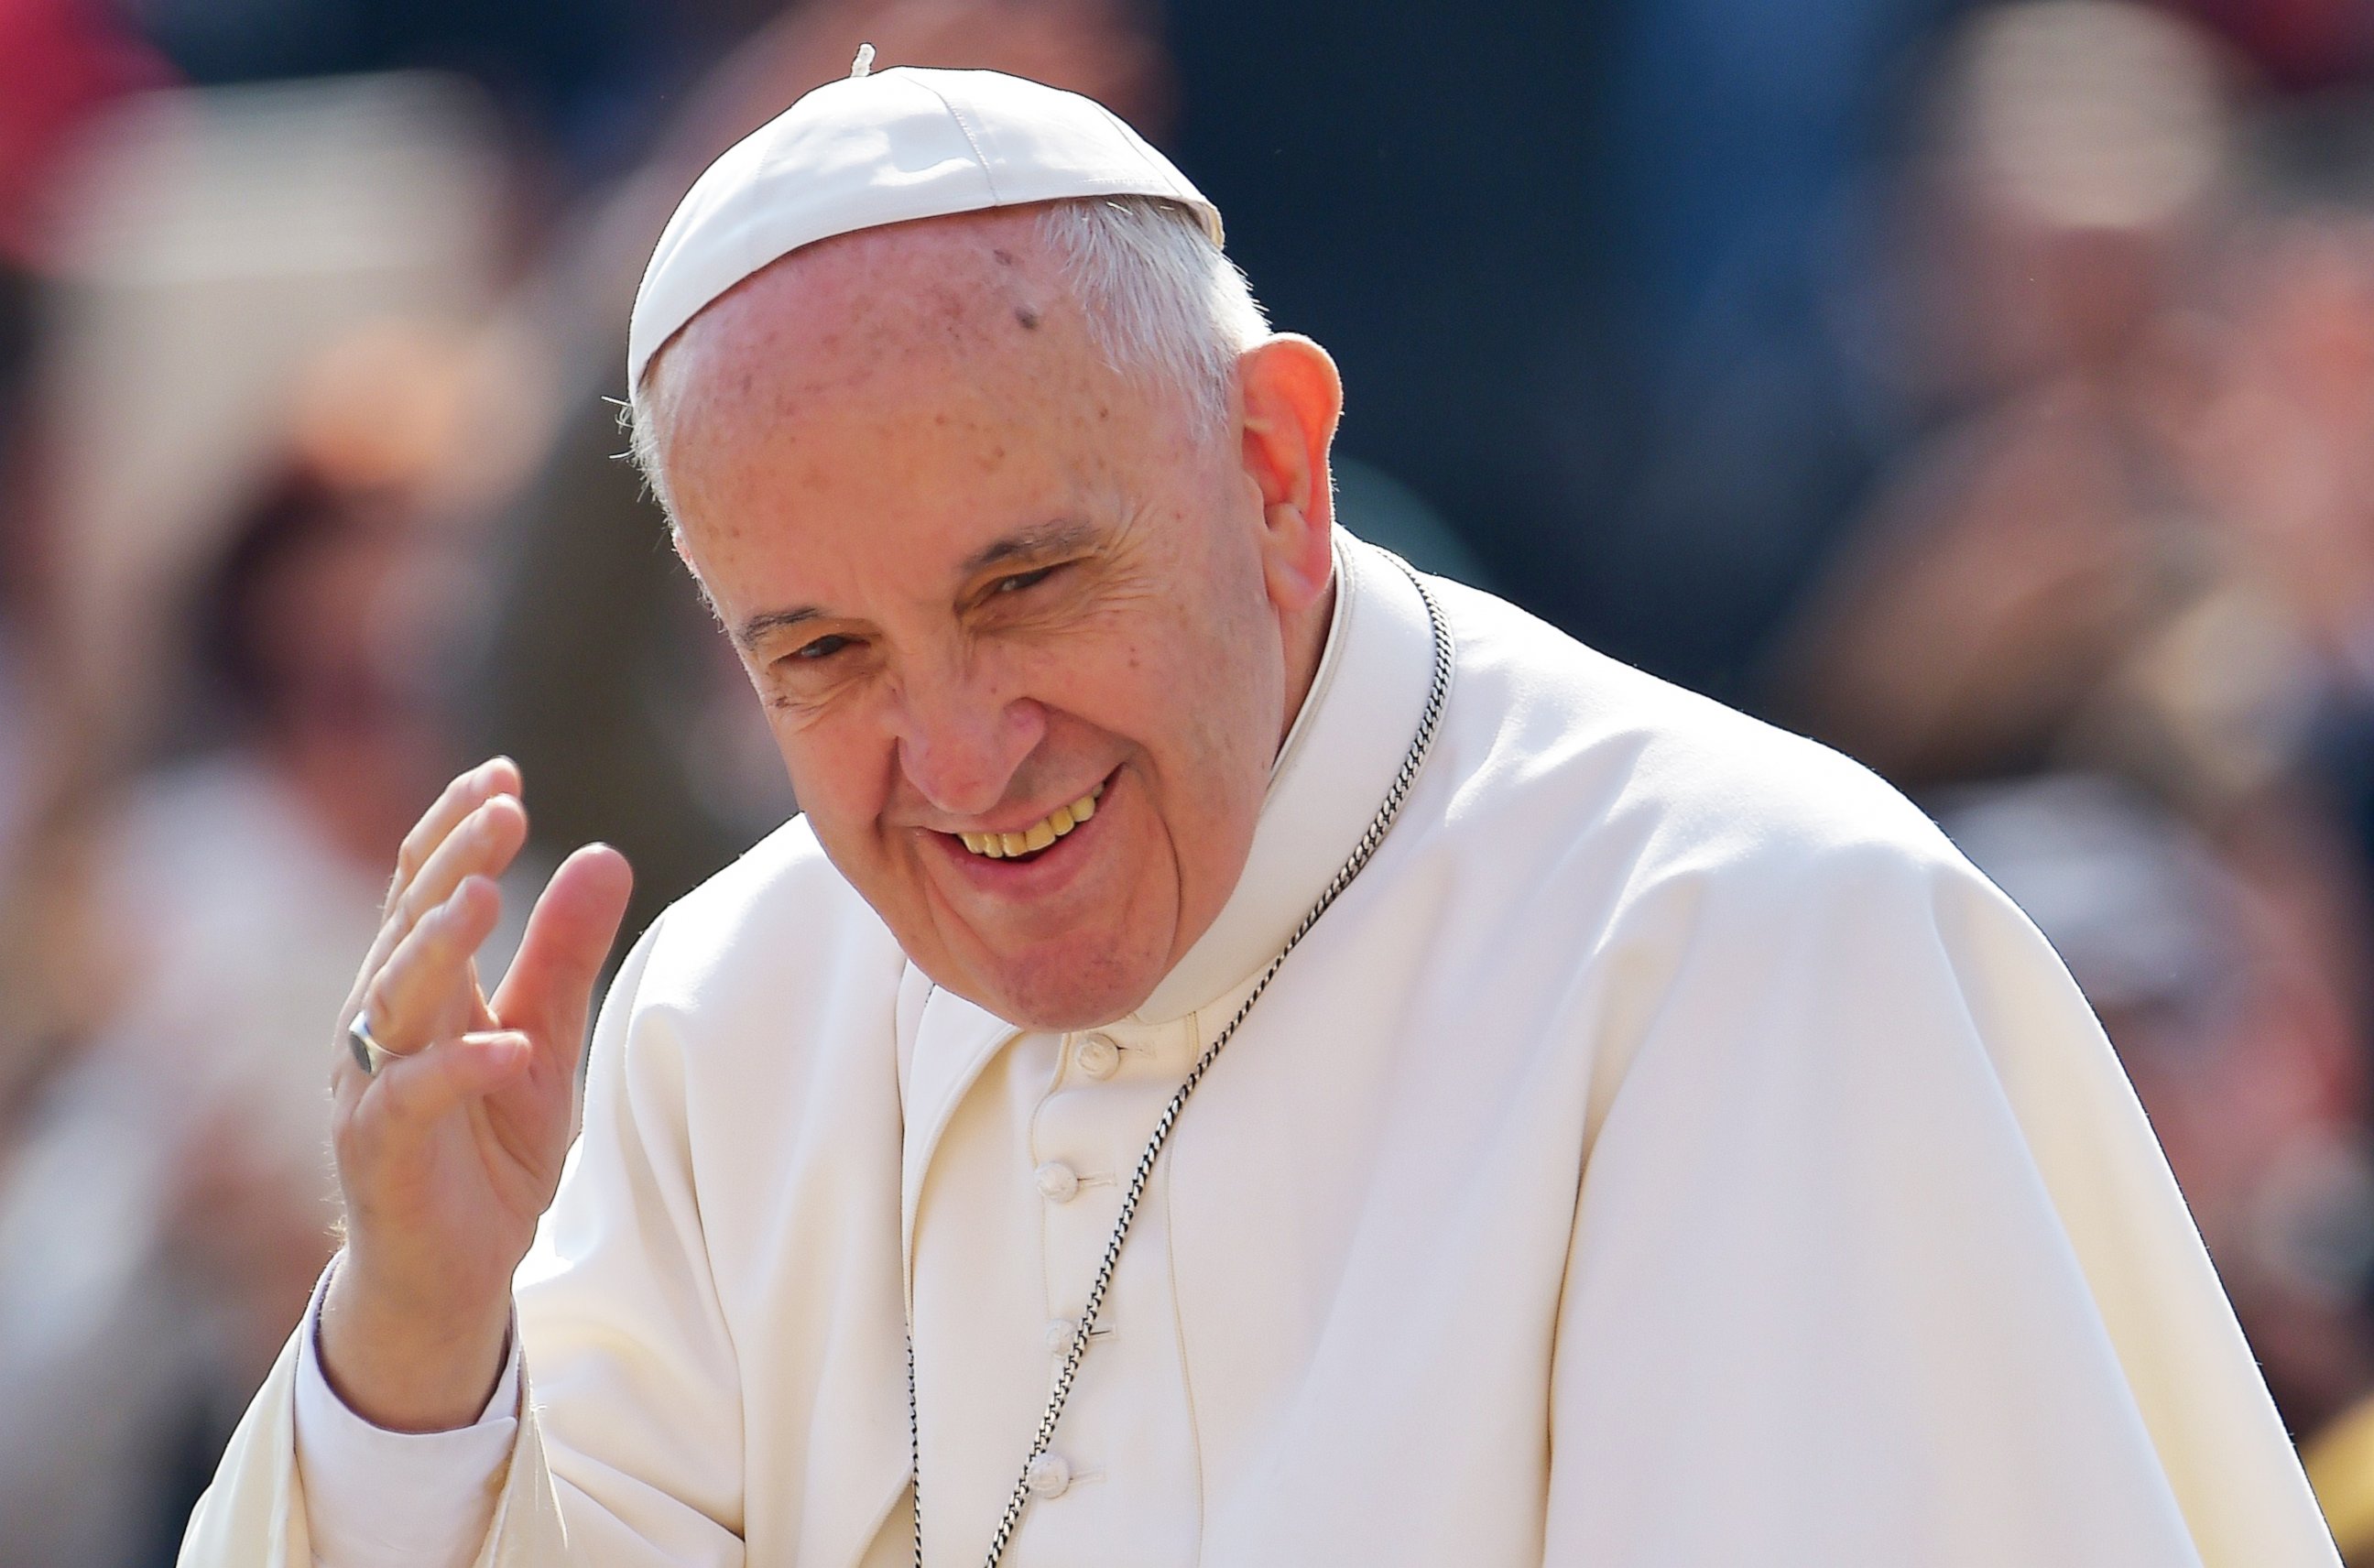 PHOTO: Pope Francis is pictured on April 15, 2014 in St. Peter's Square at the Vatican.